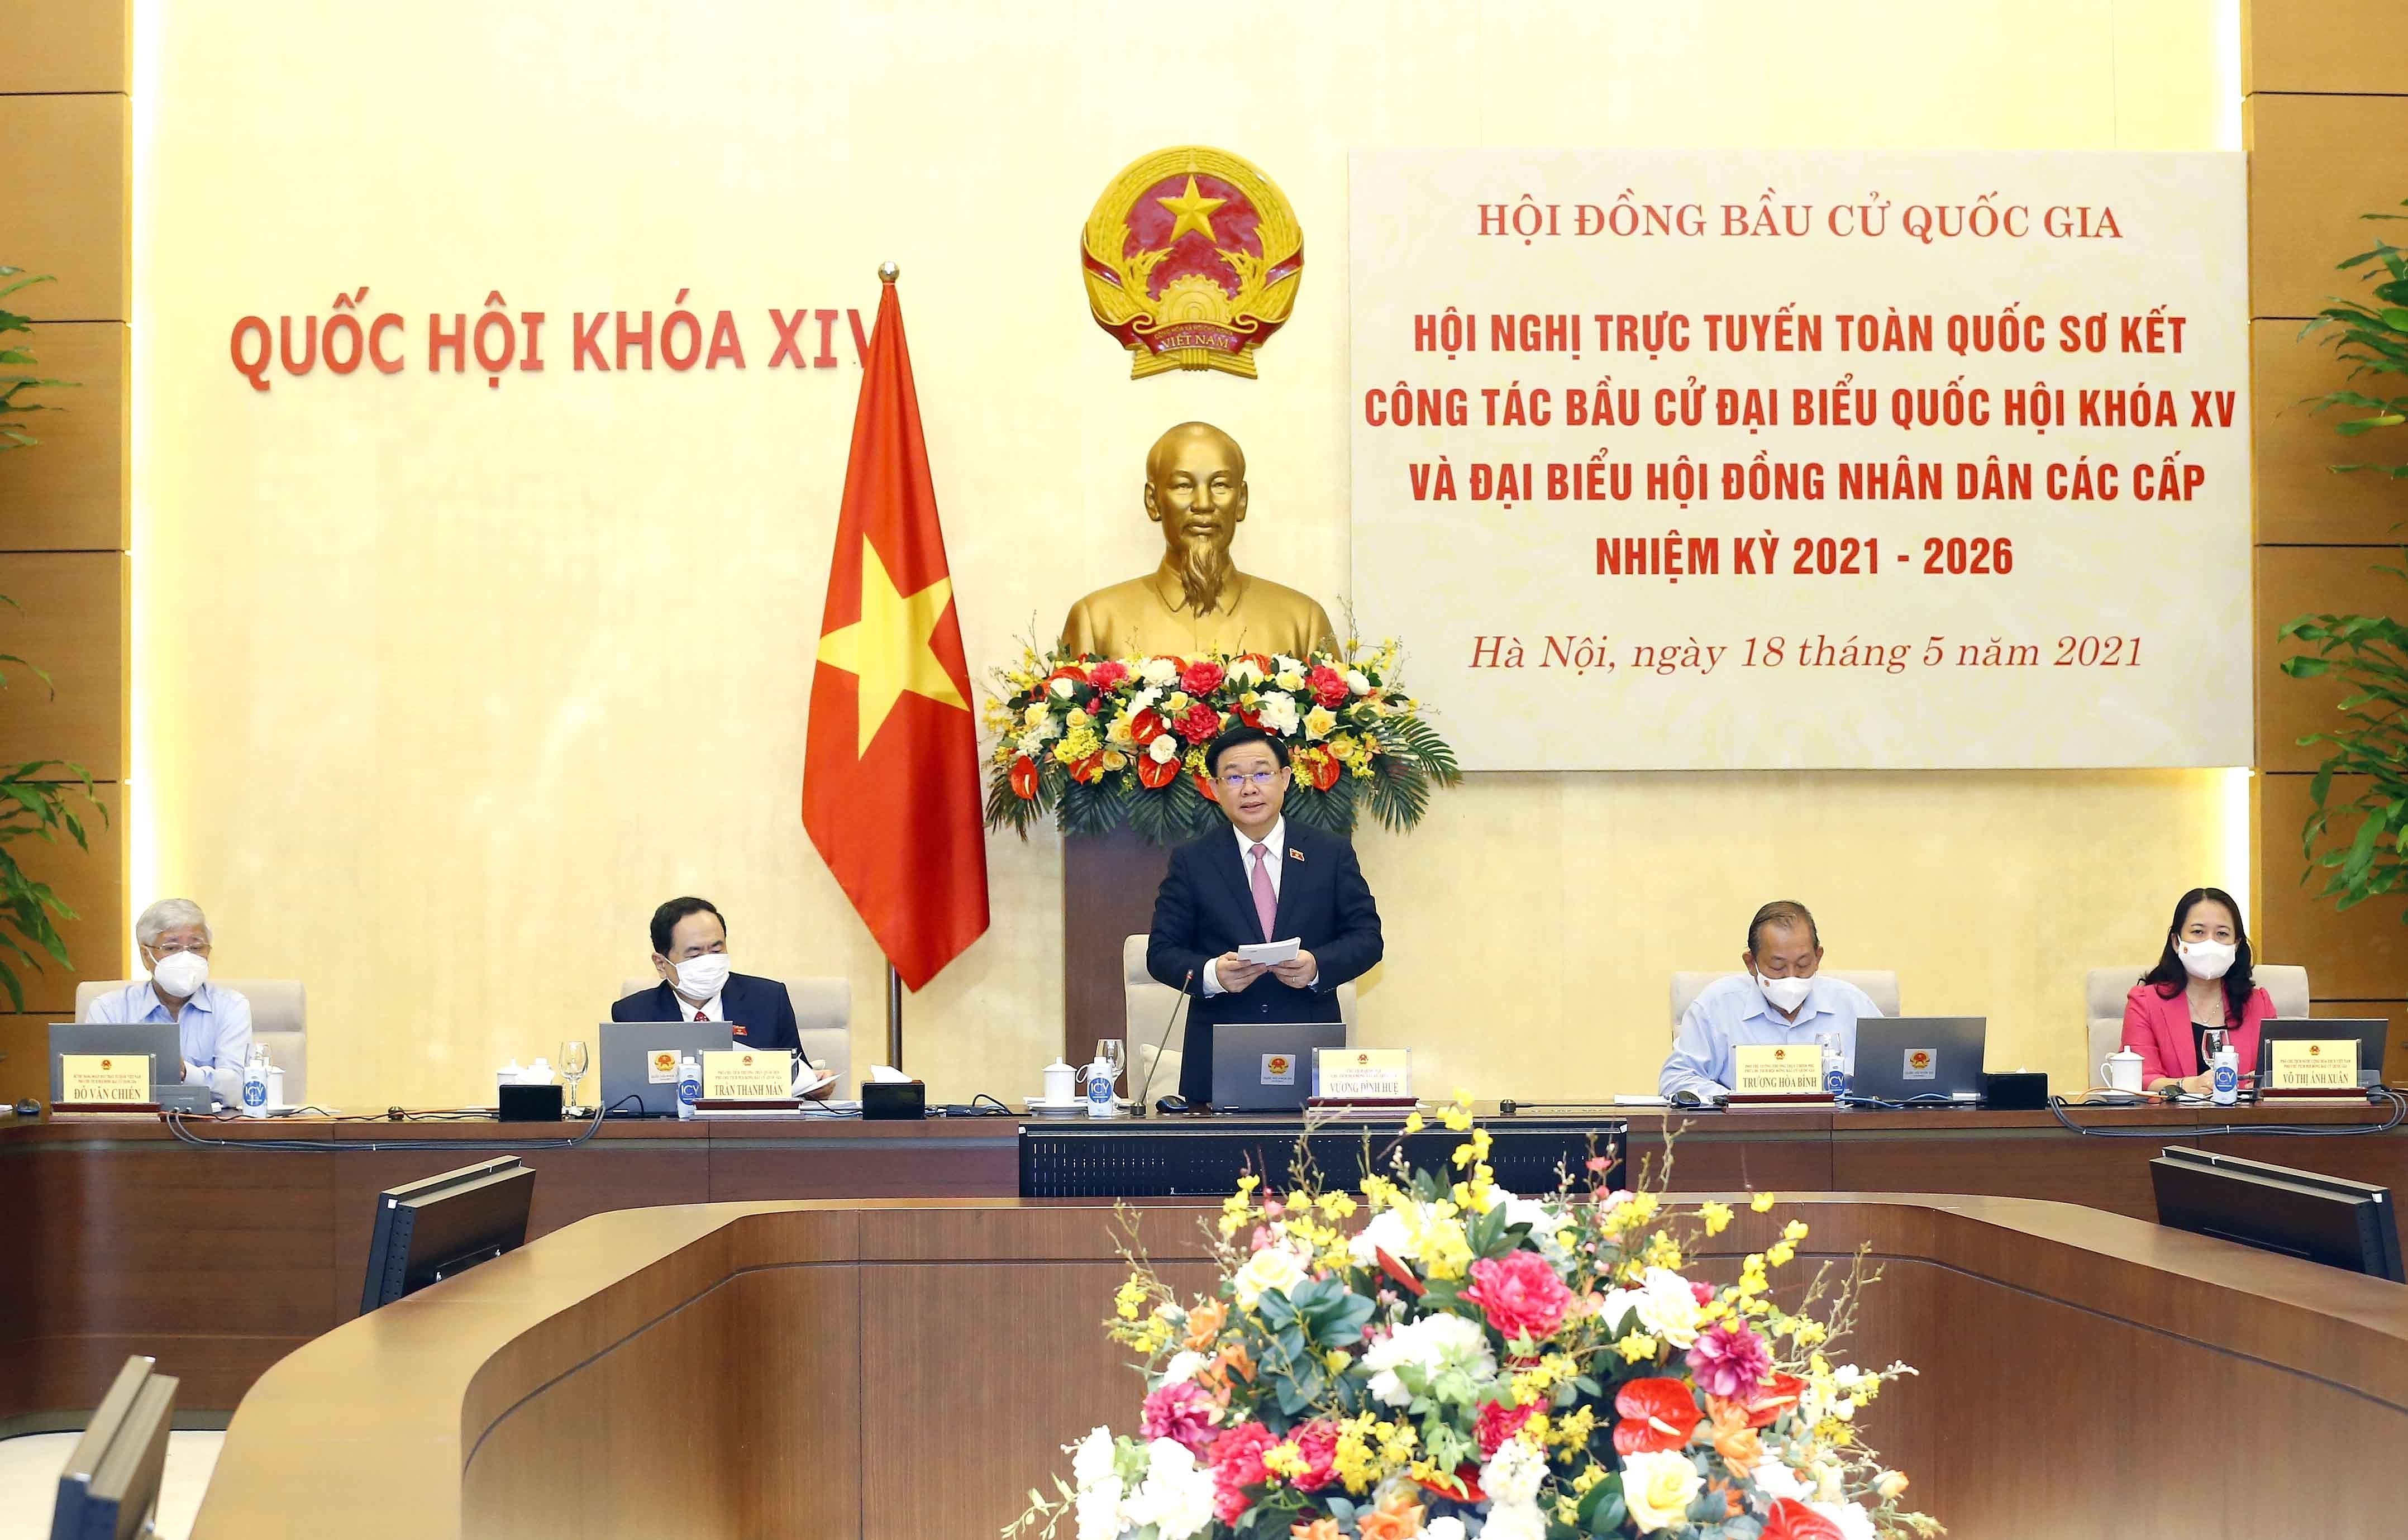 Second national conference on general elections held hinh anh 1